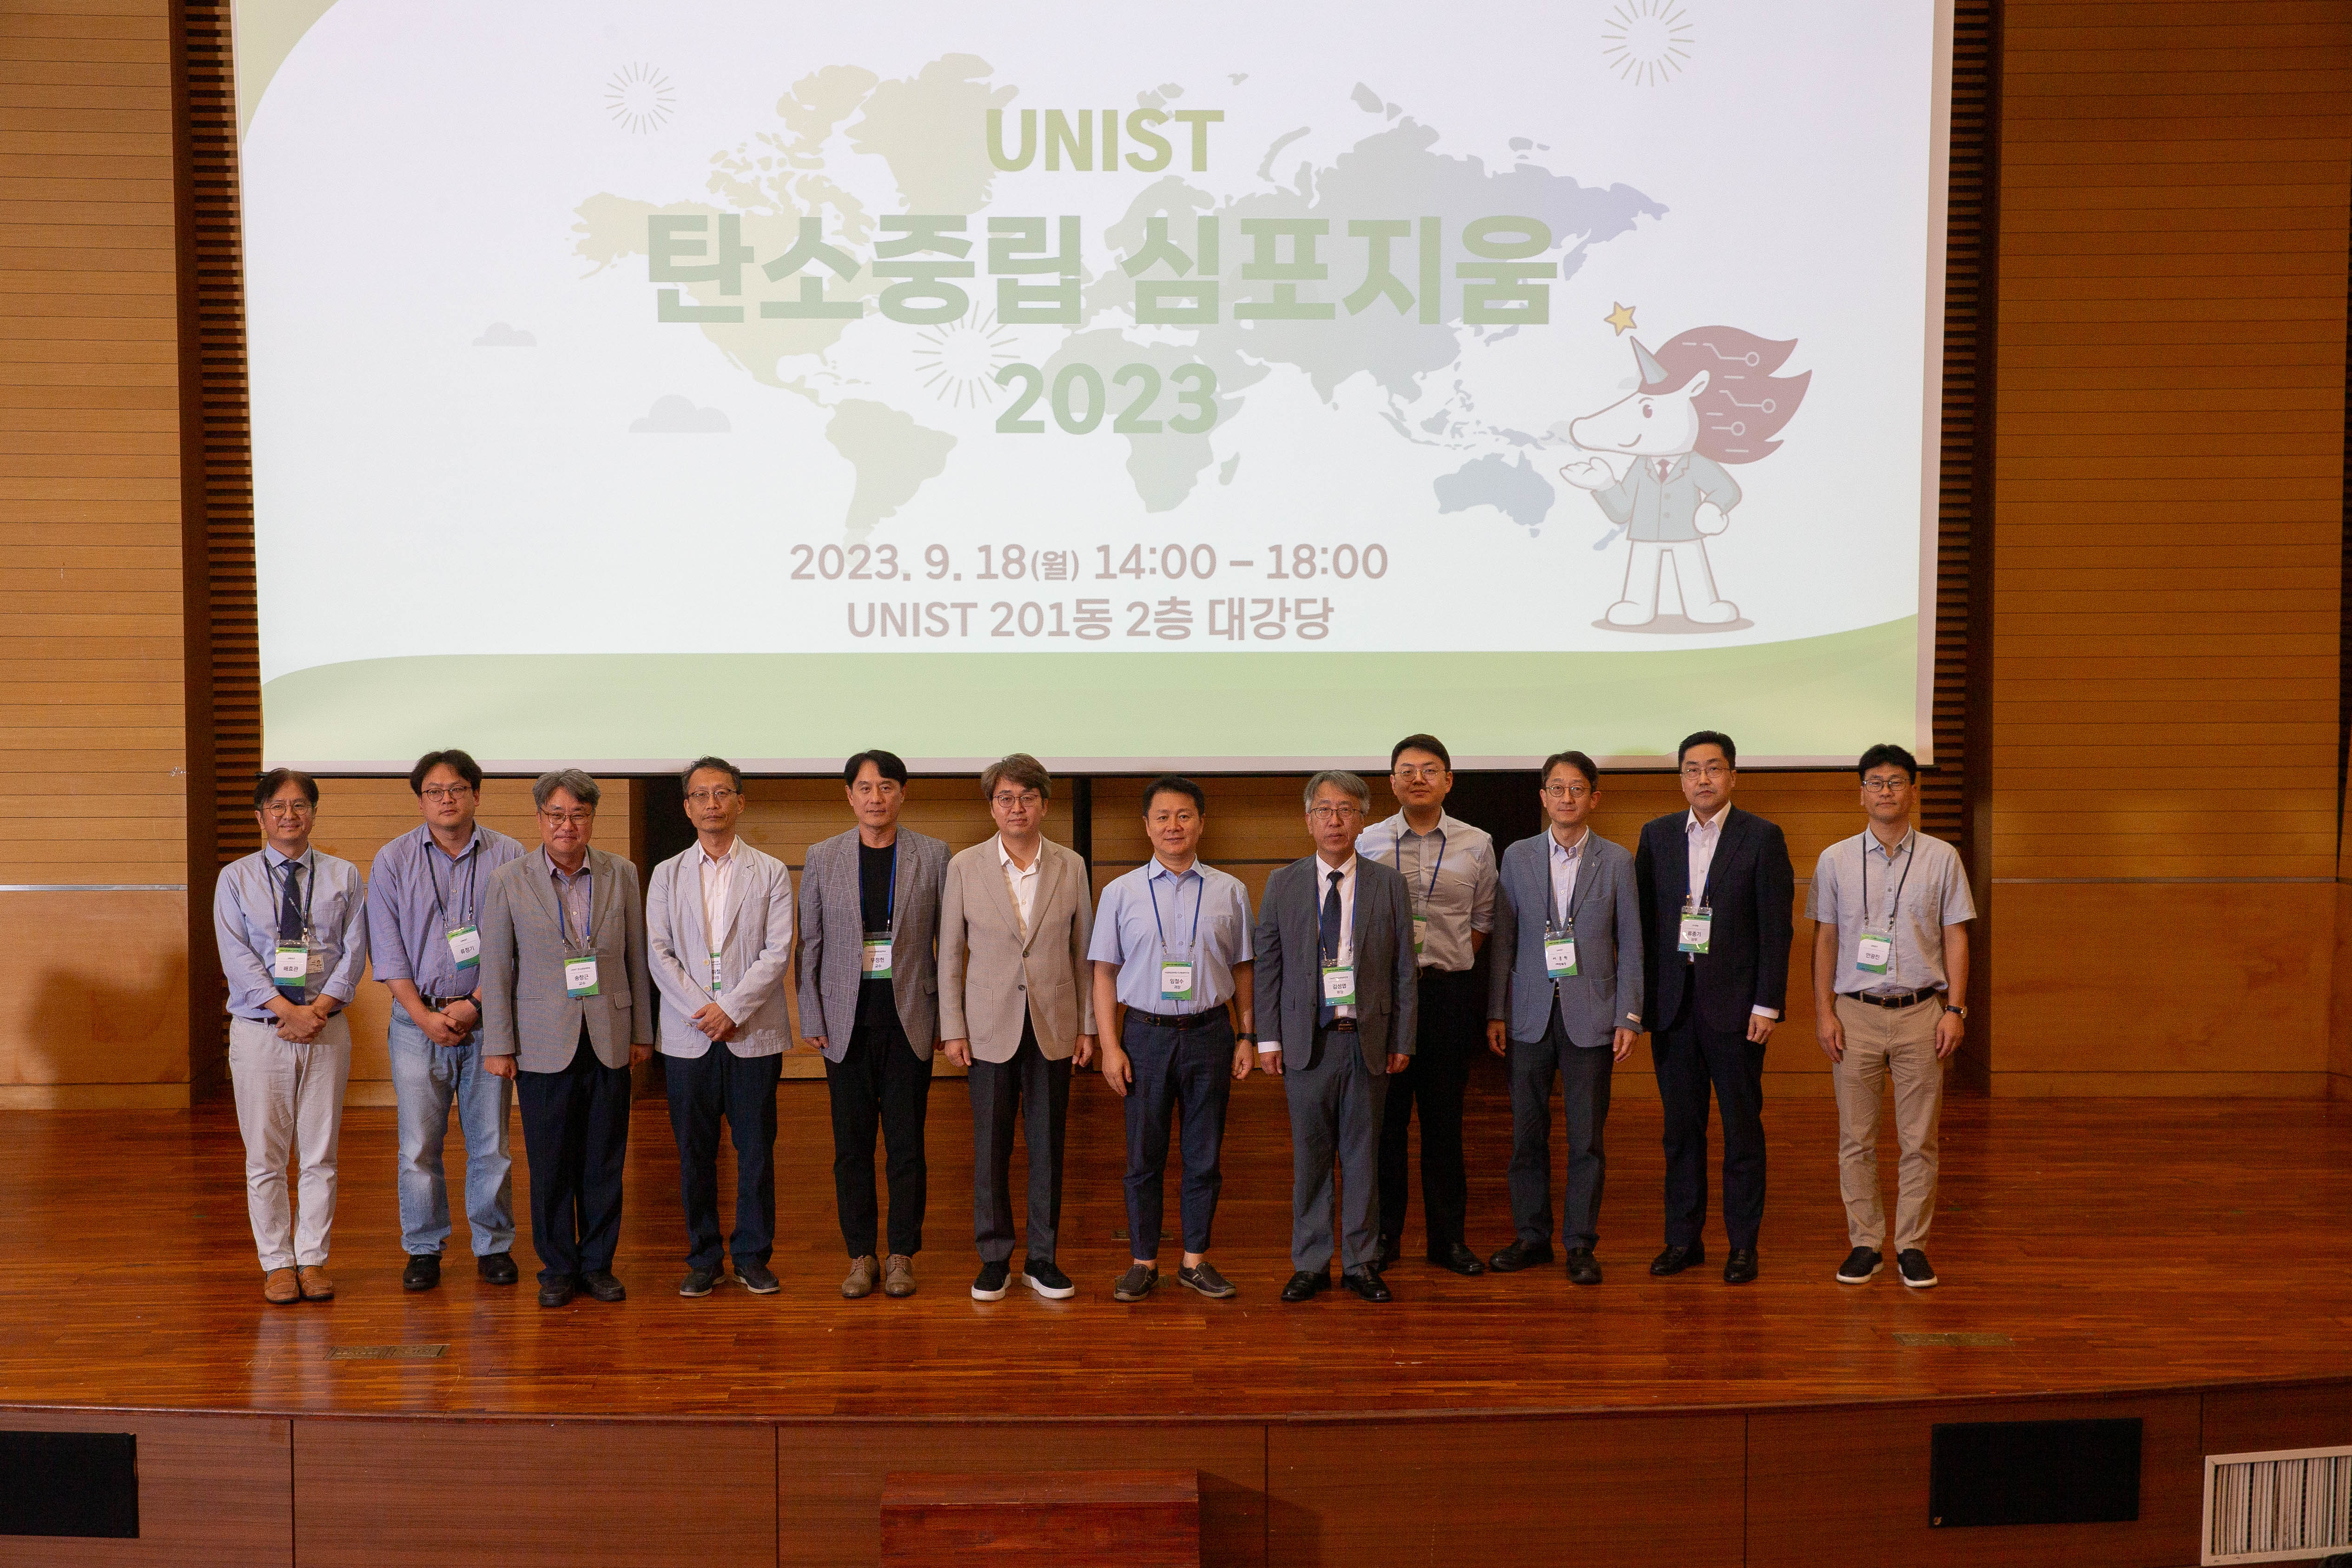 Group photograph taken at the UNIST Carbon Neutrality Symposium 2023.